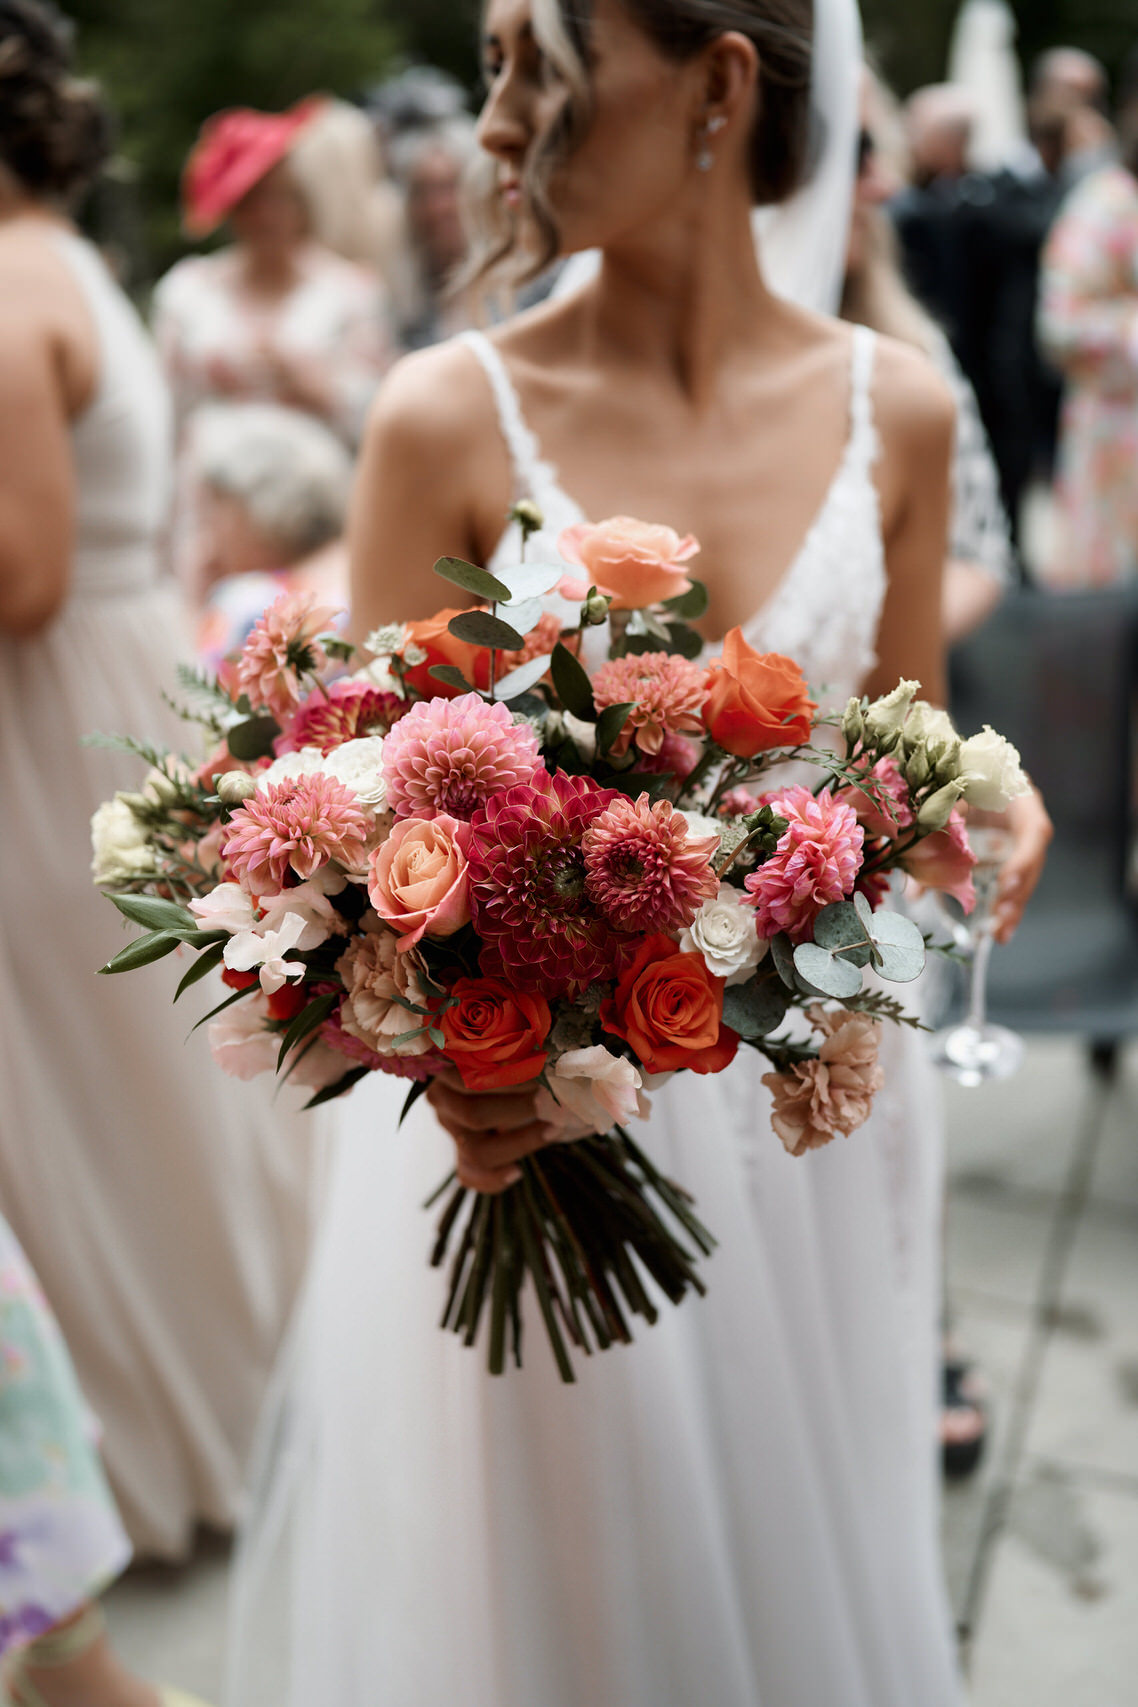 A bride holding a bouquet of flowers at a wedding.